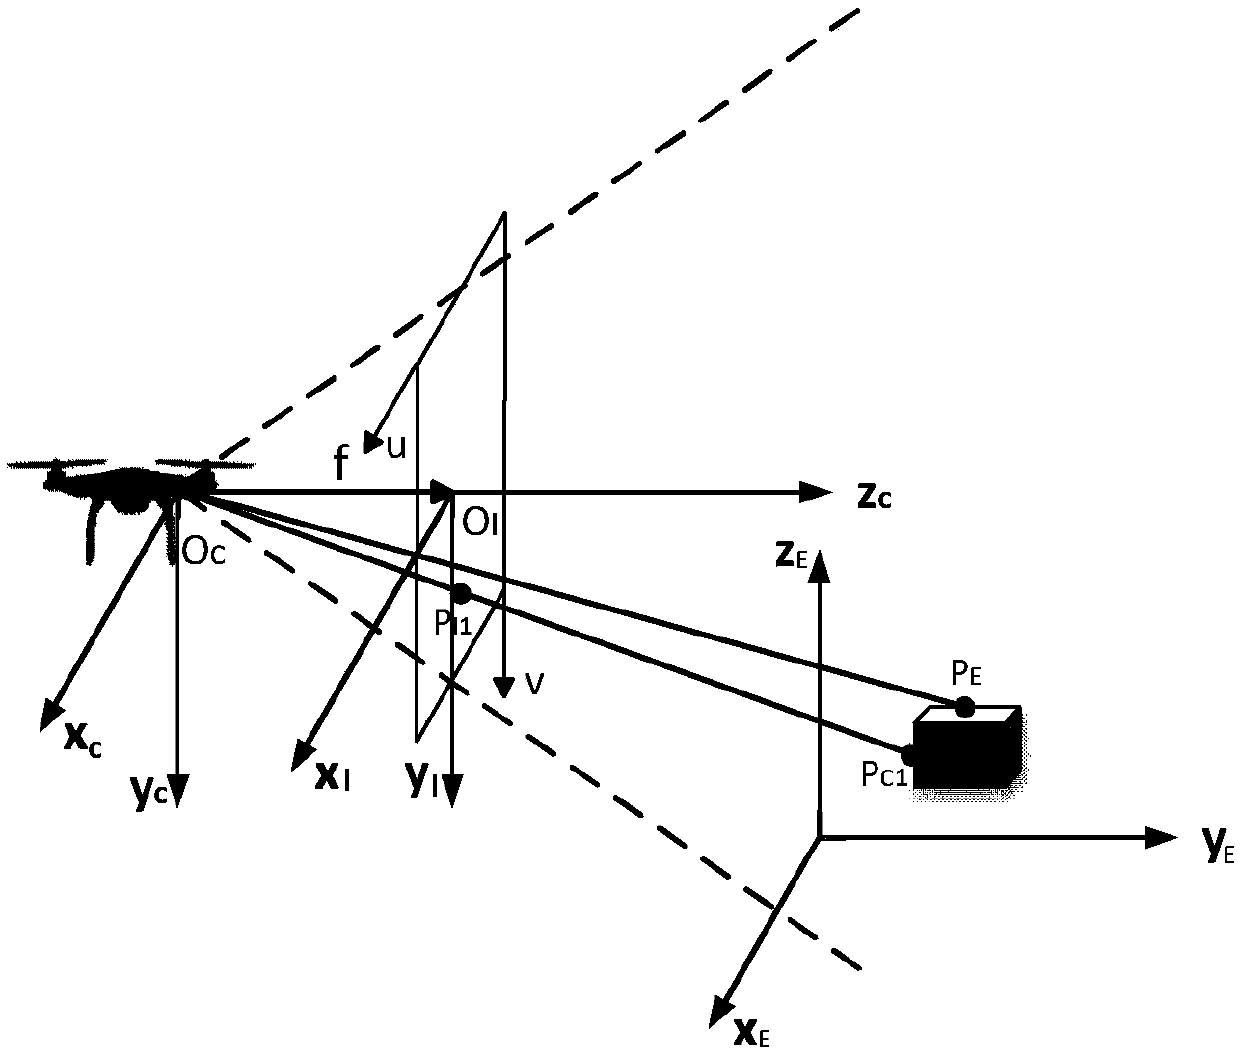 A monocular camera scale estimating method based on a quadrotor unmanned aerial vehicle (UAV)